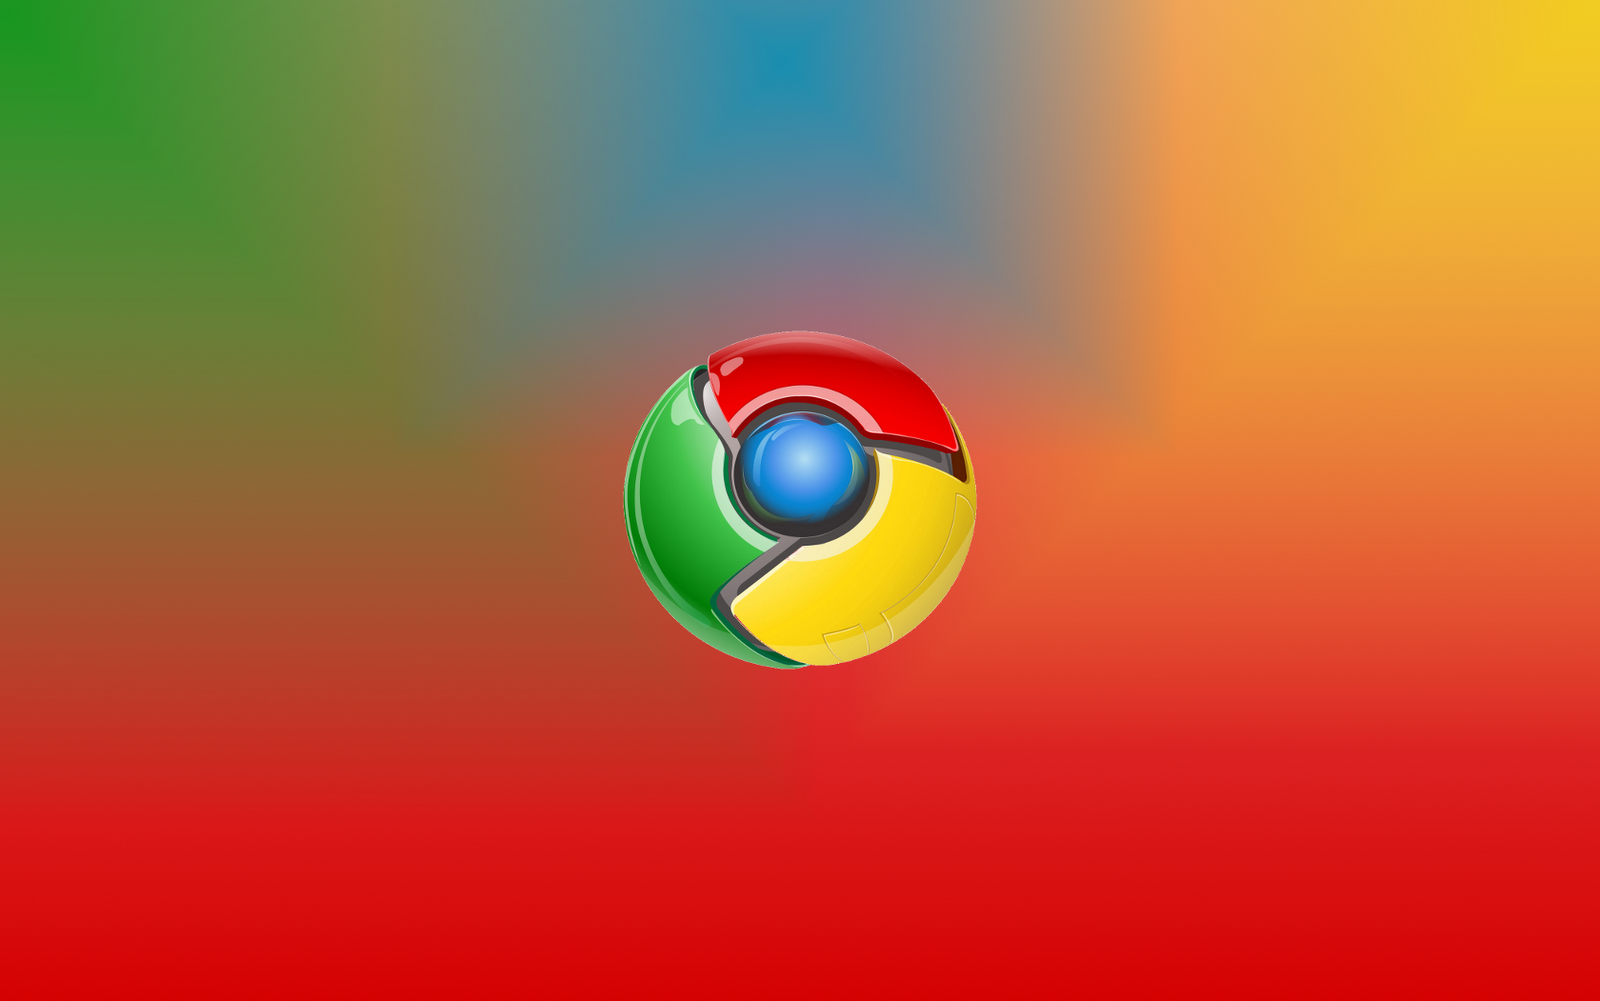 chrome os wallpapers,colorfulness,macro photography,logo,operating system,graphics